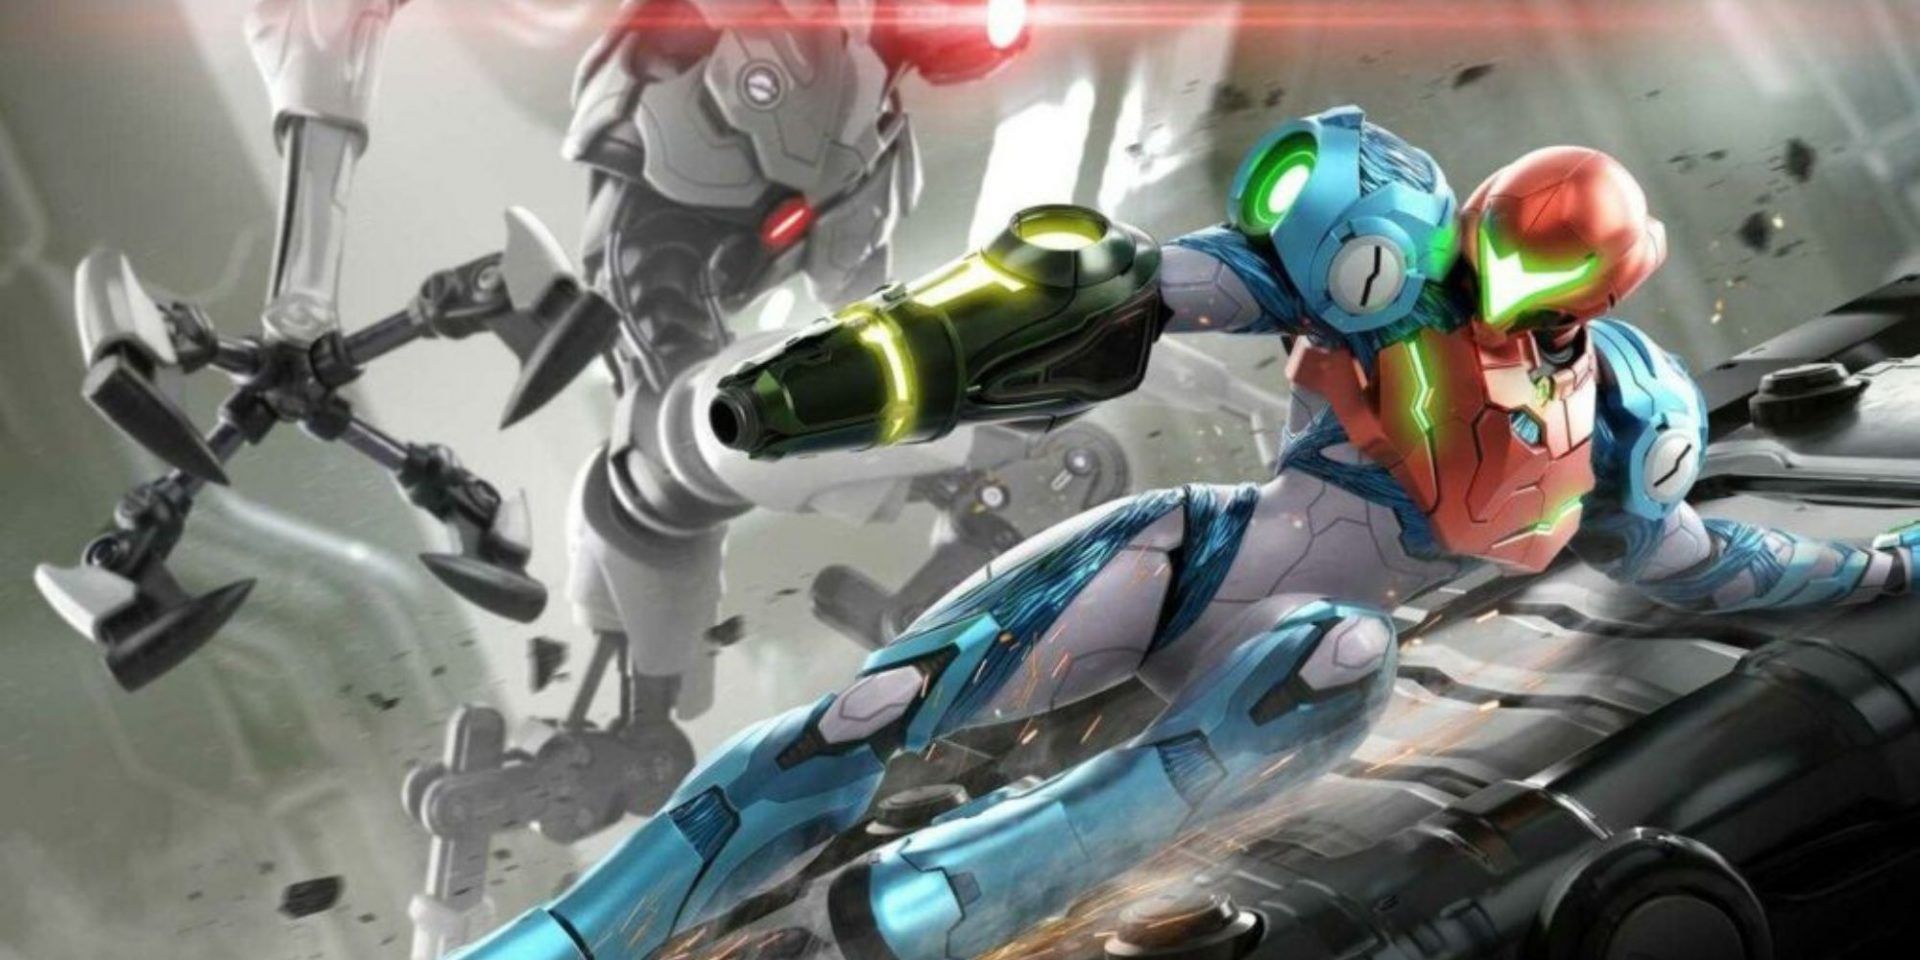 Samus sliding and evading an enemy in Metroid Dread